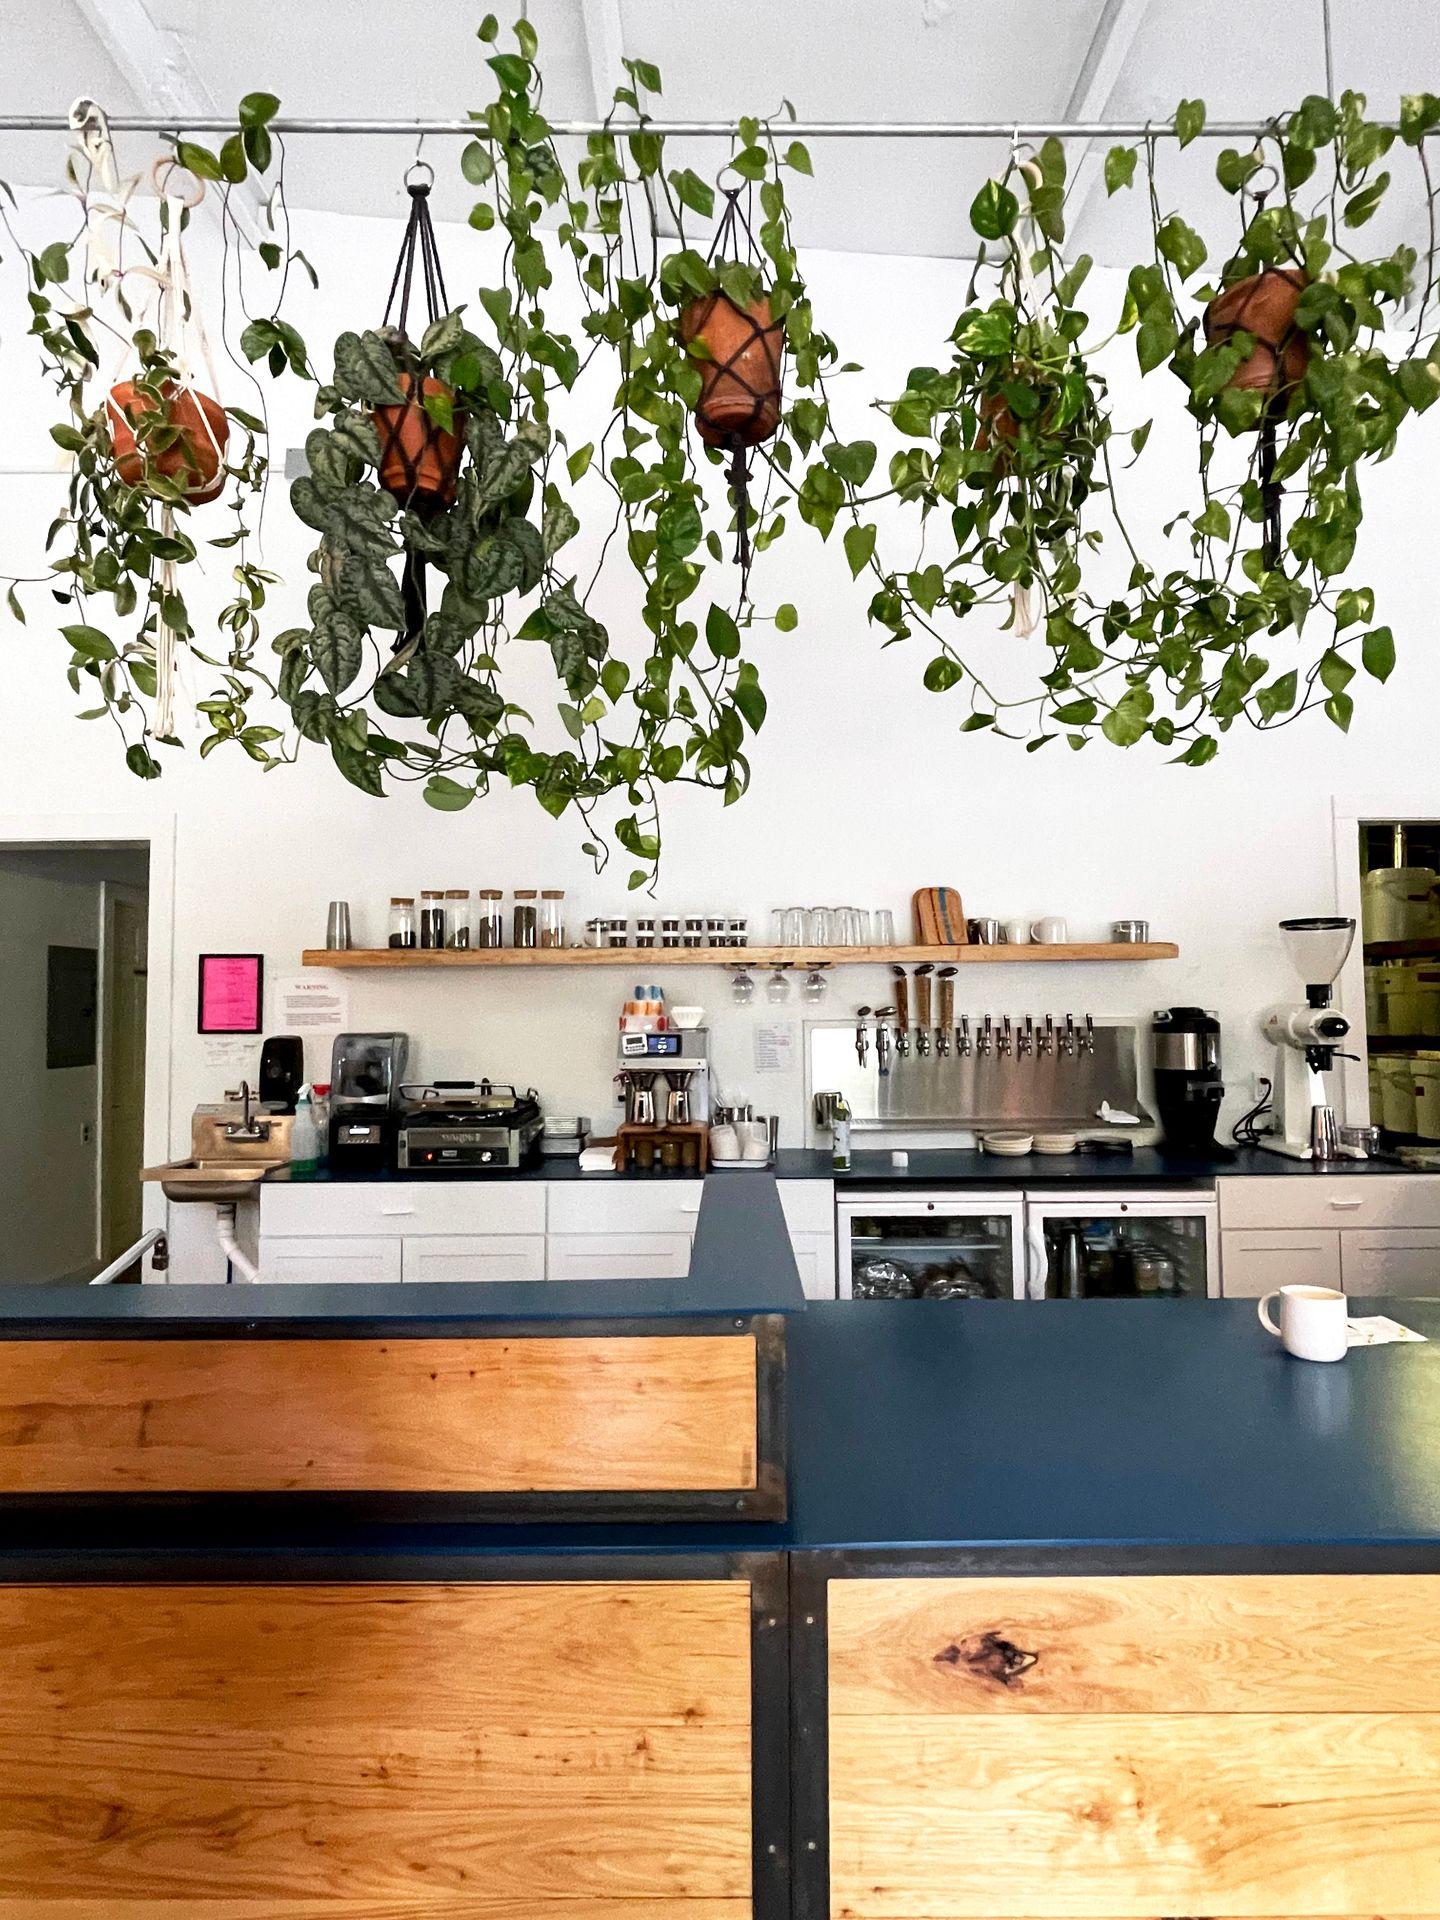 The counter at Airship Coffee. There are plants with vines hanging down from the ceiling.